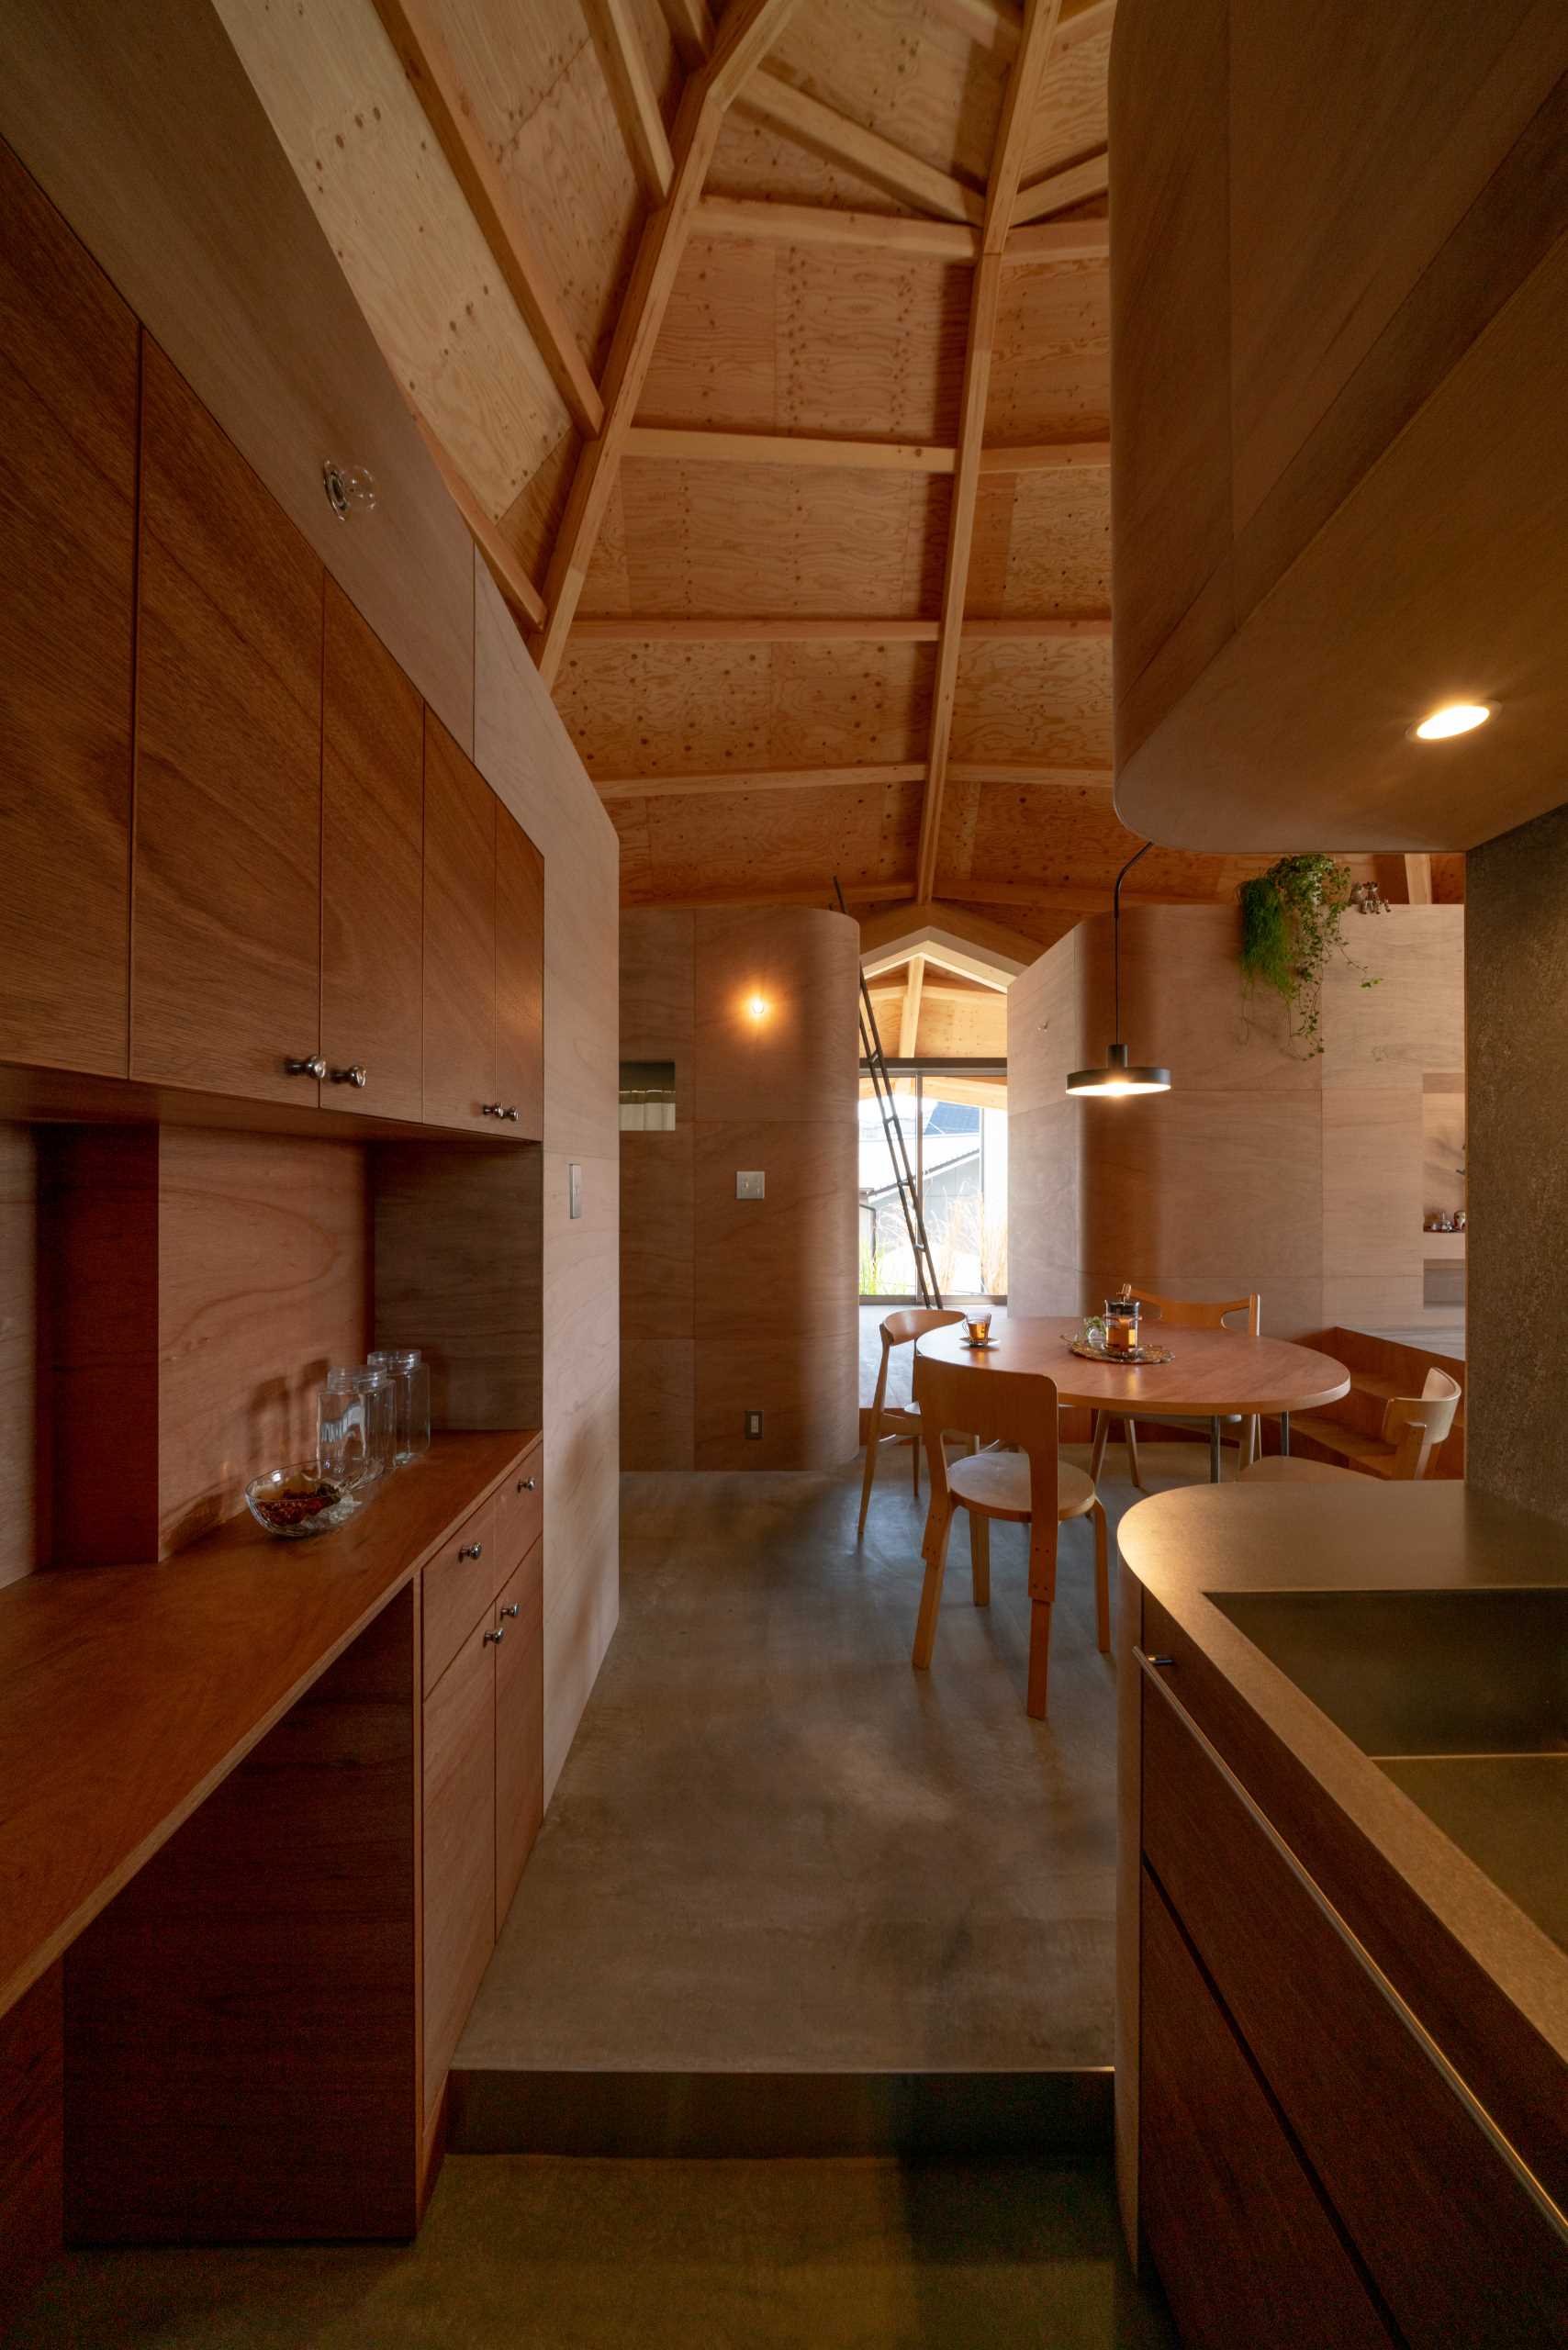 The small kitchen in this octagonal-shaped home is located adjacent to the dining area and showcases a different wood to the rest of the home.